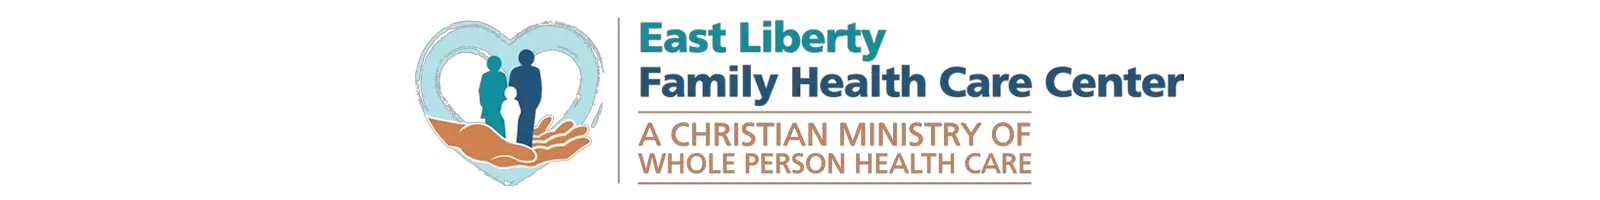 East Liberty Family Health Care Center - East Liberty Medical Office